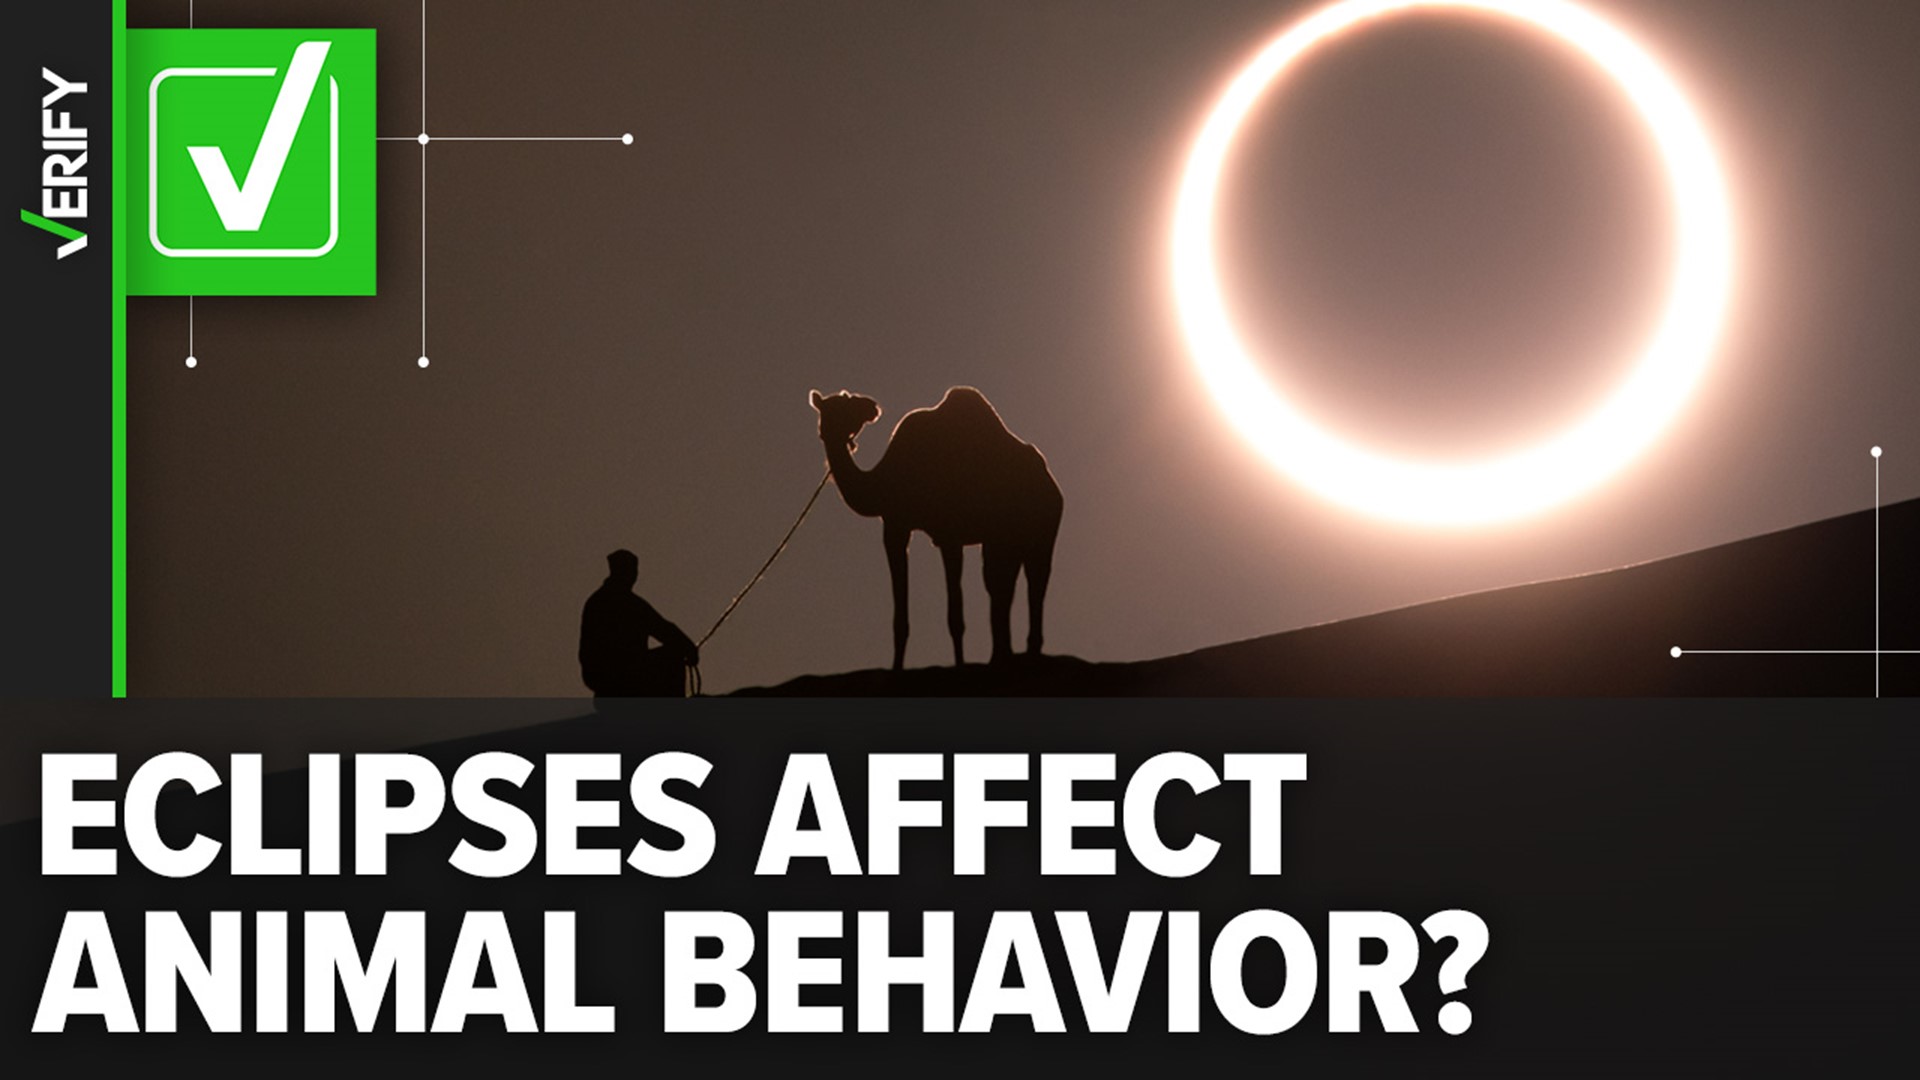 Reports of unusual animal behaviors during a total solar eclipse date back centuries, according to NASA, but the agency says the effects are not fully understood.